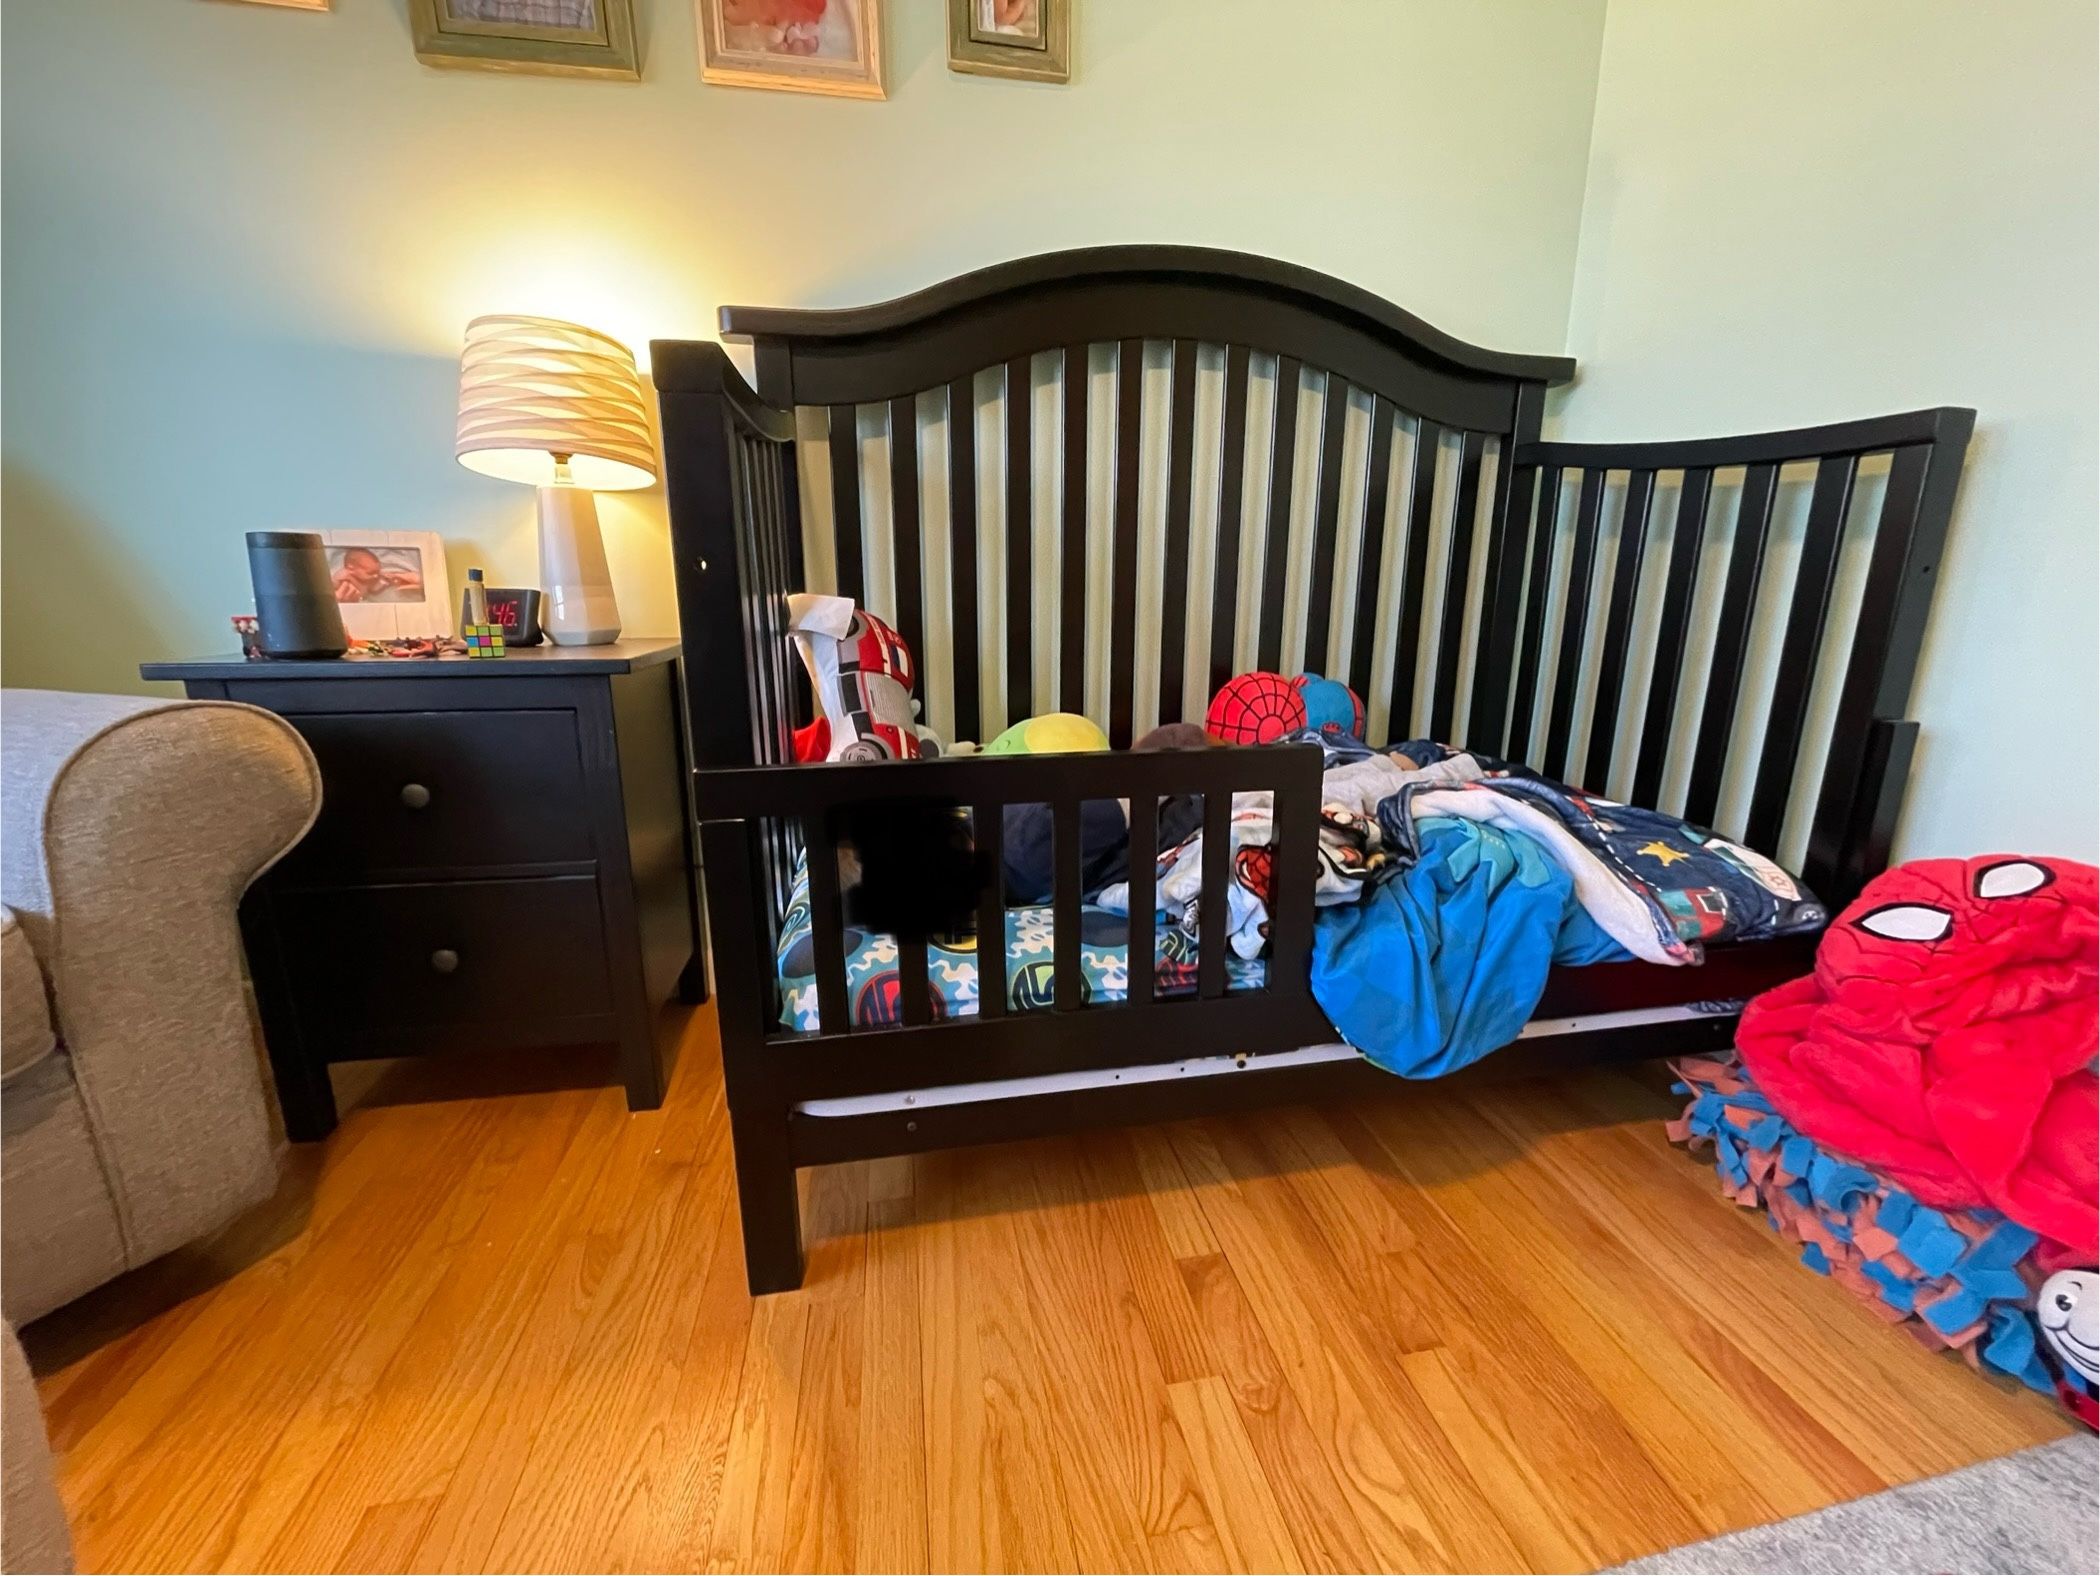 Baby Appleseed Stratford Crib with Toddler Bed Conversion